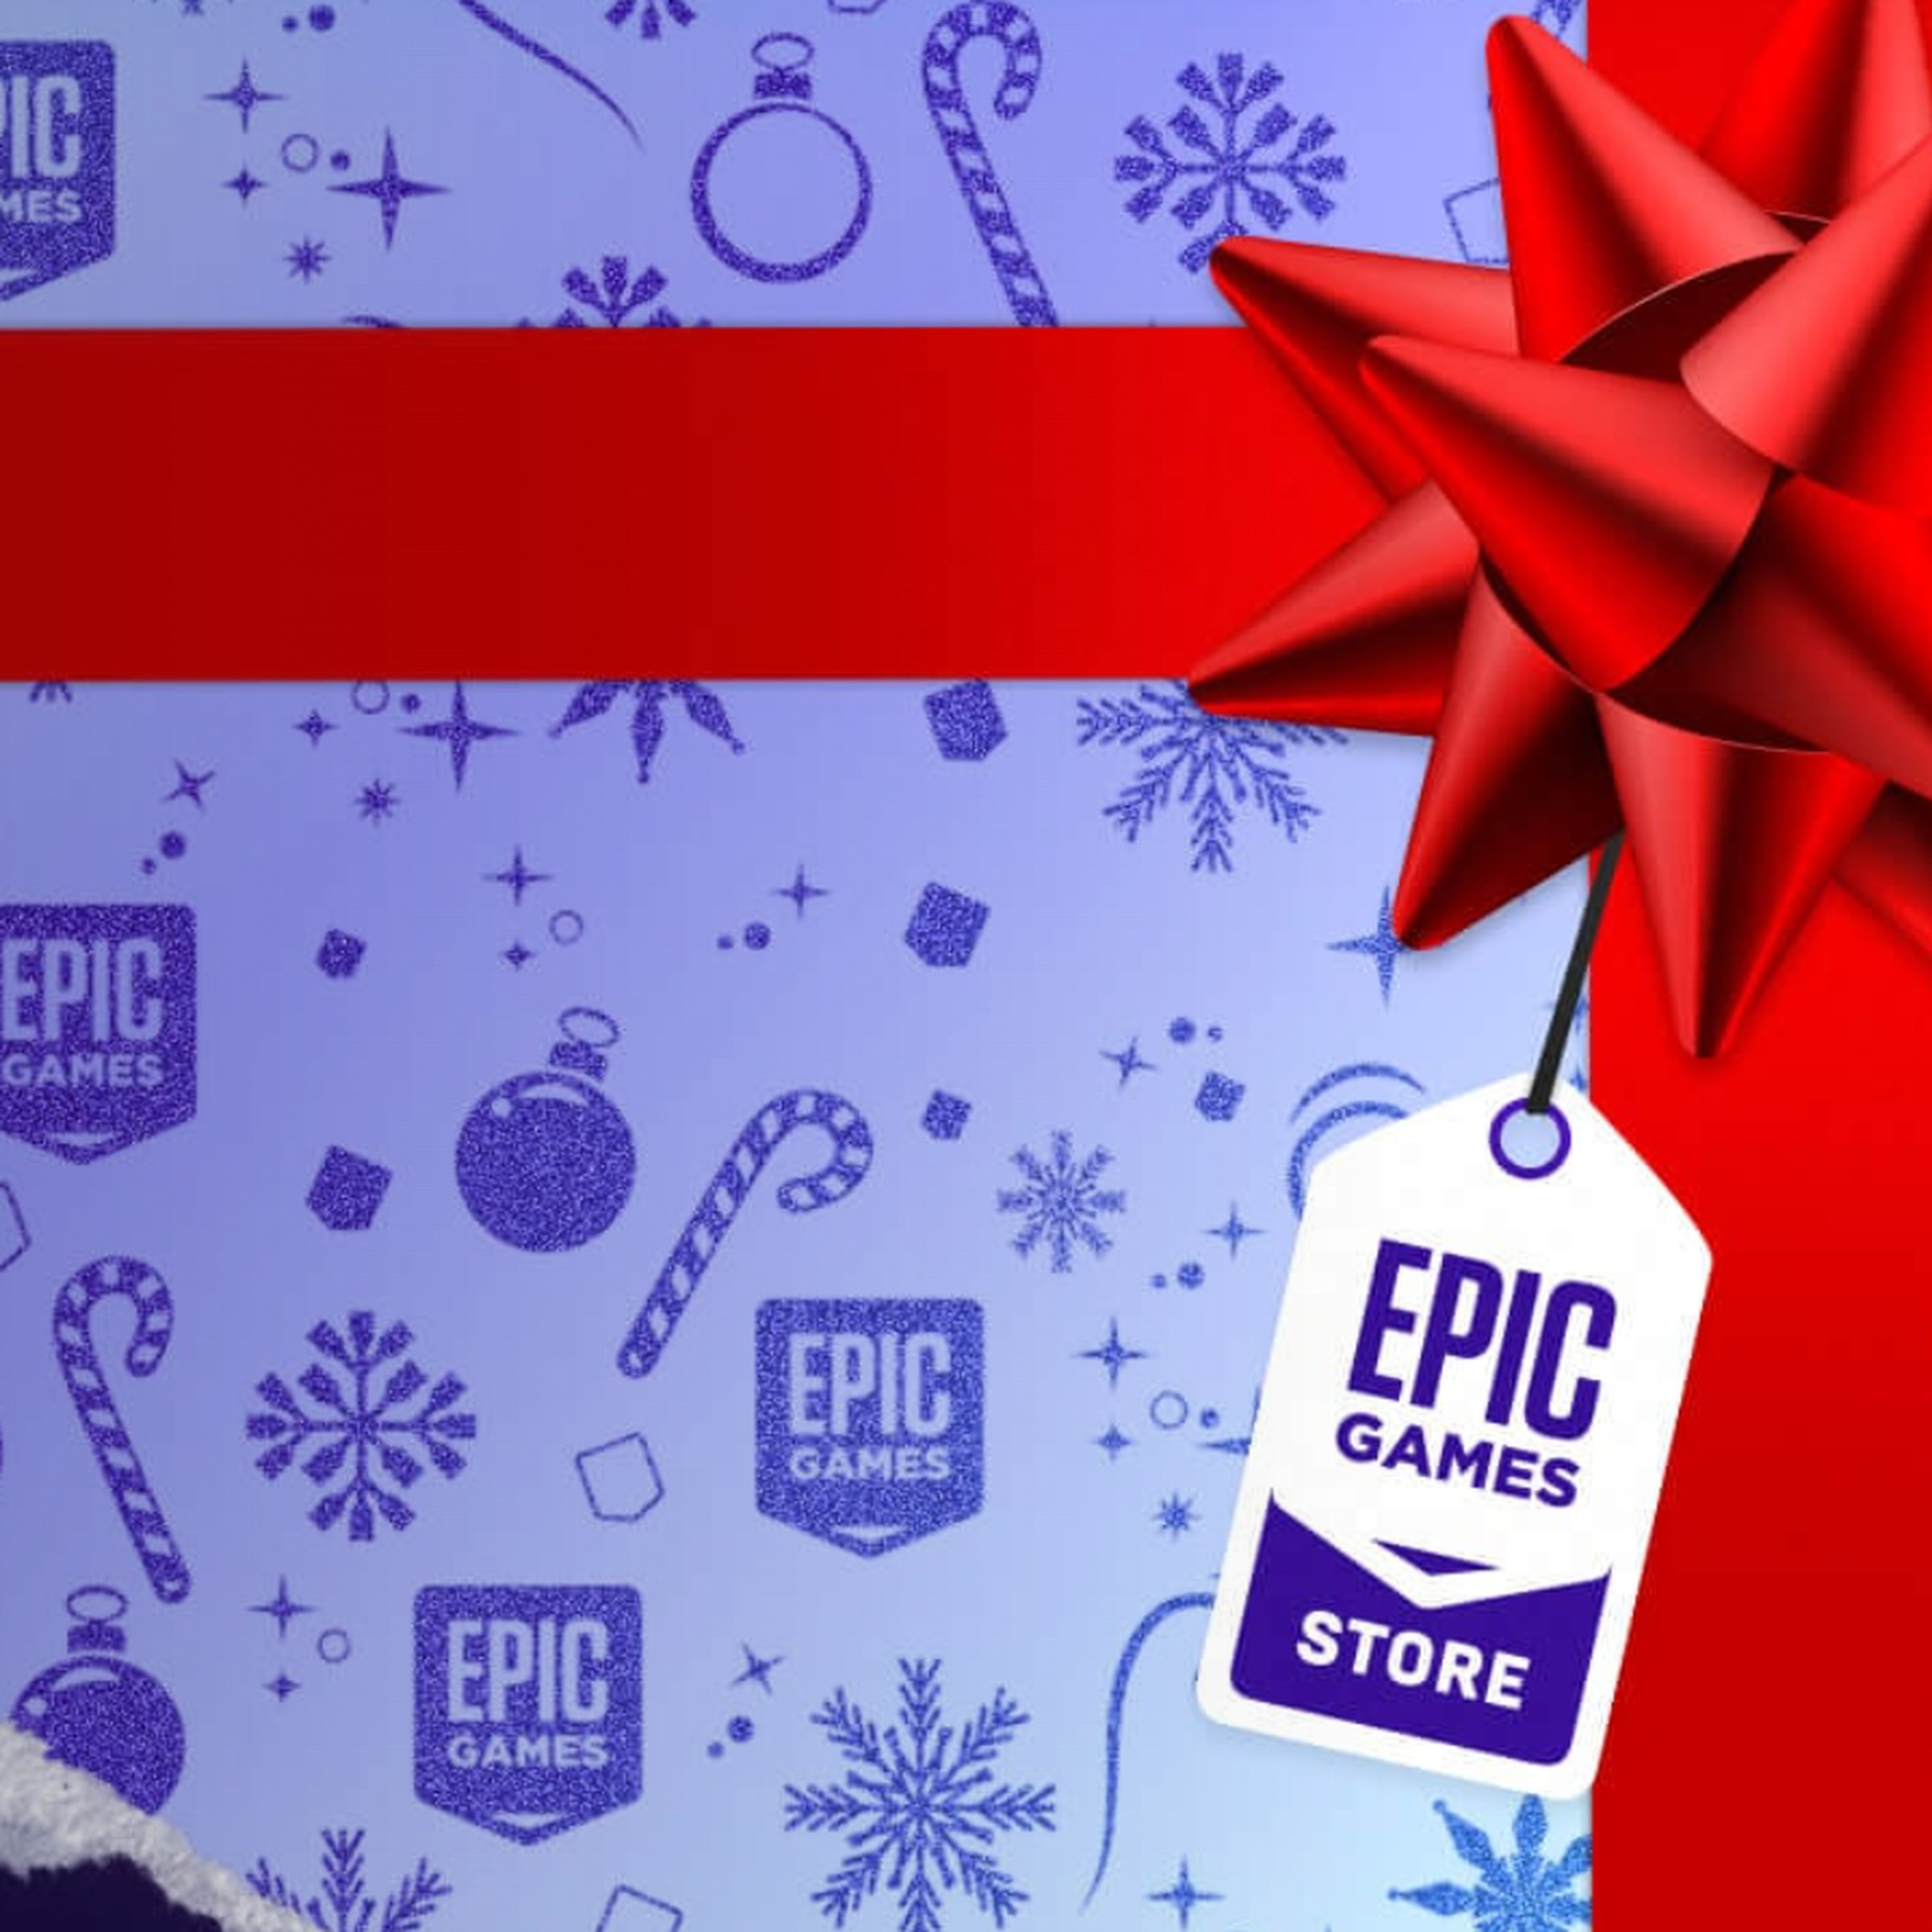 Now through January 6th, Epic Games is slashing prices on titles new and old.